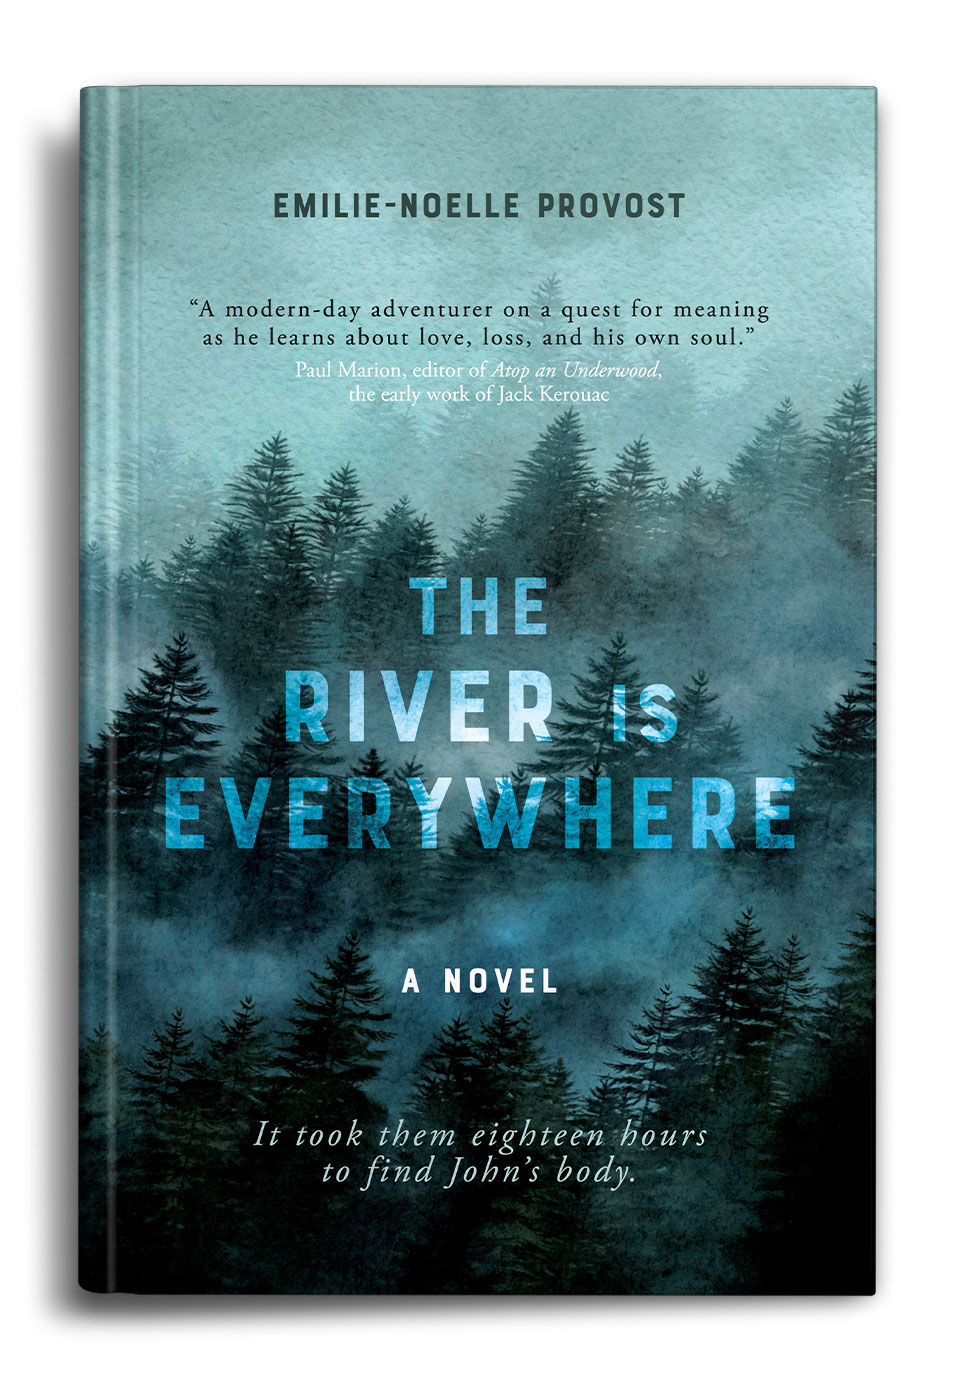 The River is Everywhere by Emilie-Noelle Provost